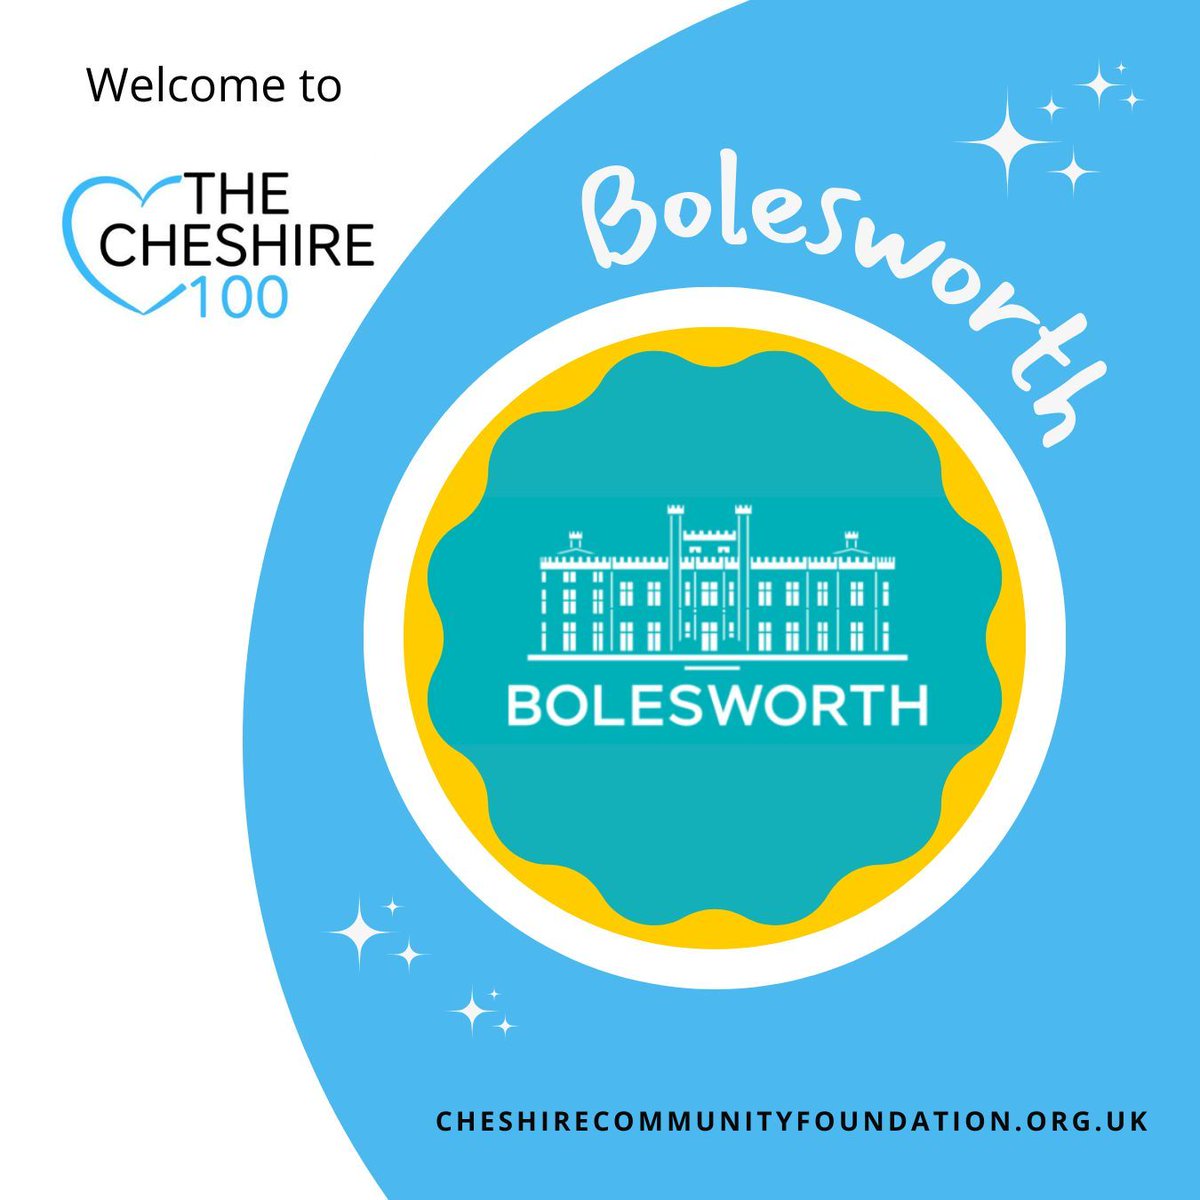 Welcome to the Cheshire 100 Supporters Club Bolesworth ✨ Our donors allow CCF to build a happier, fairer and stronger county for all. Thank you so much for your support #Cheshire Want to find out more? Visit our website - buff.ly/3CREKEq